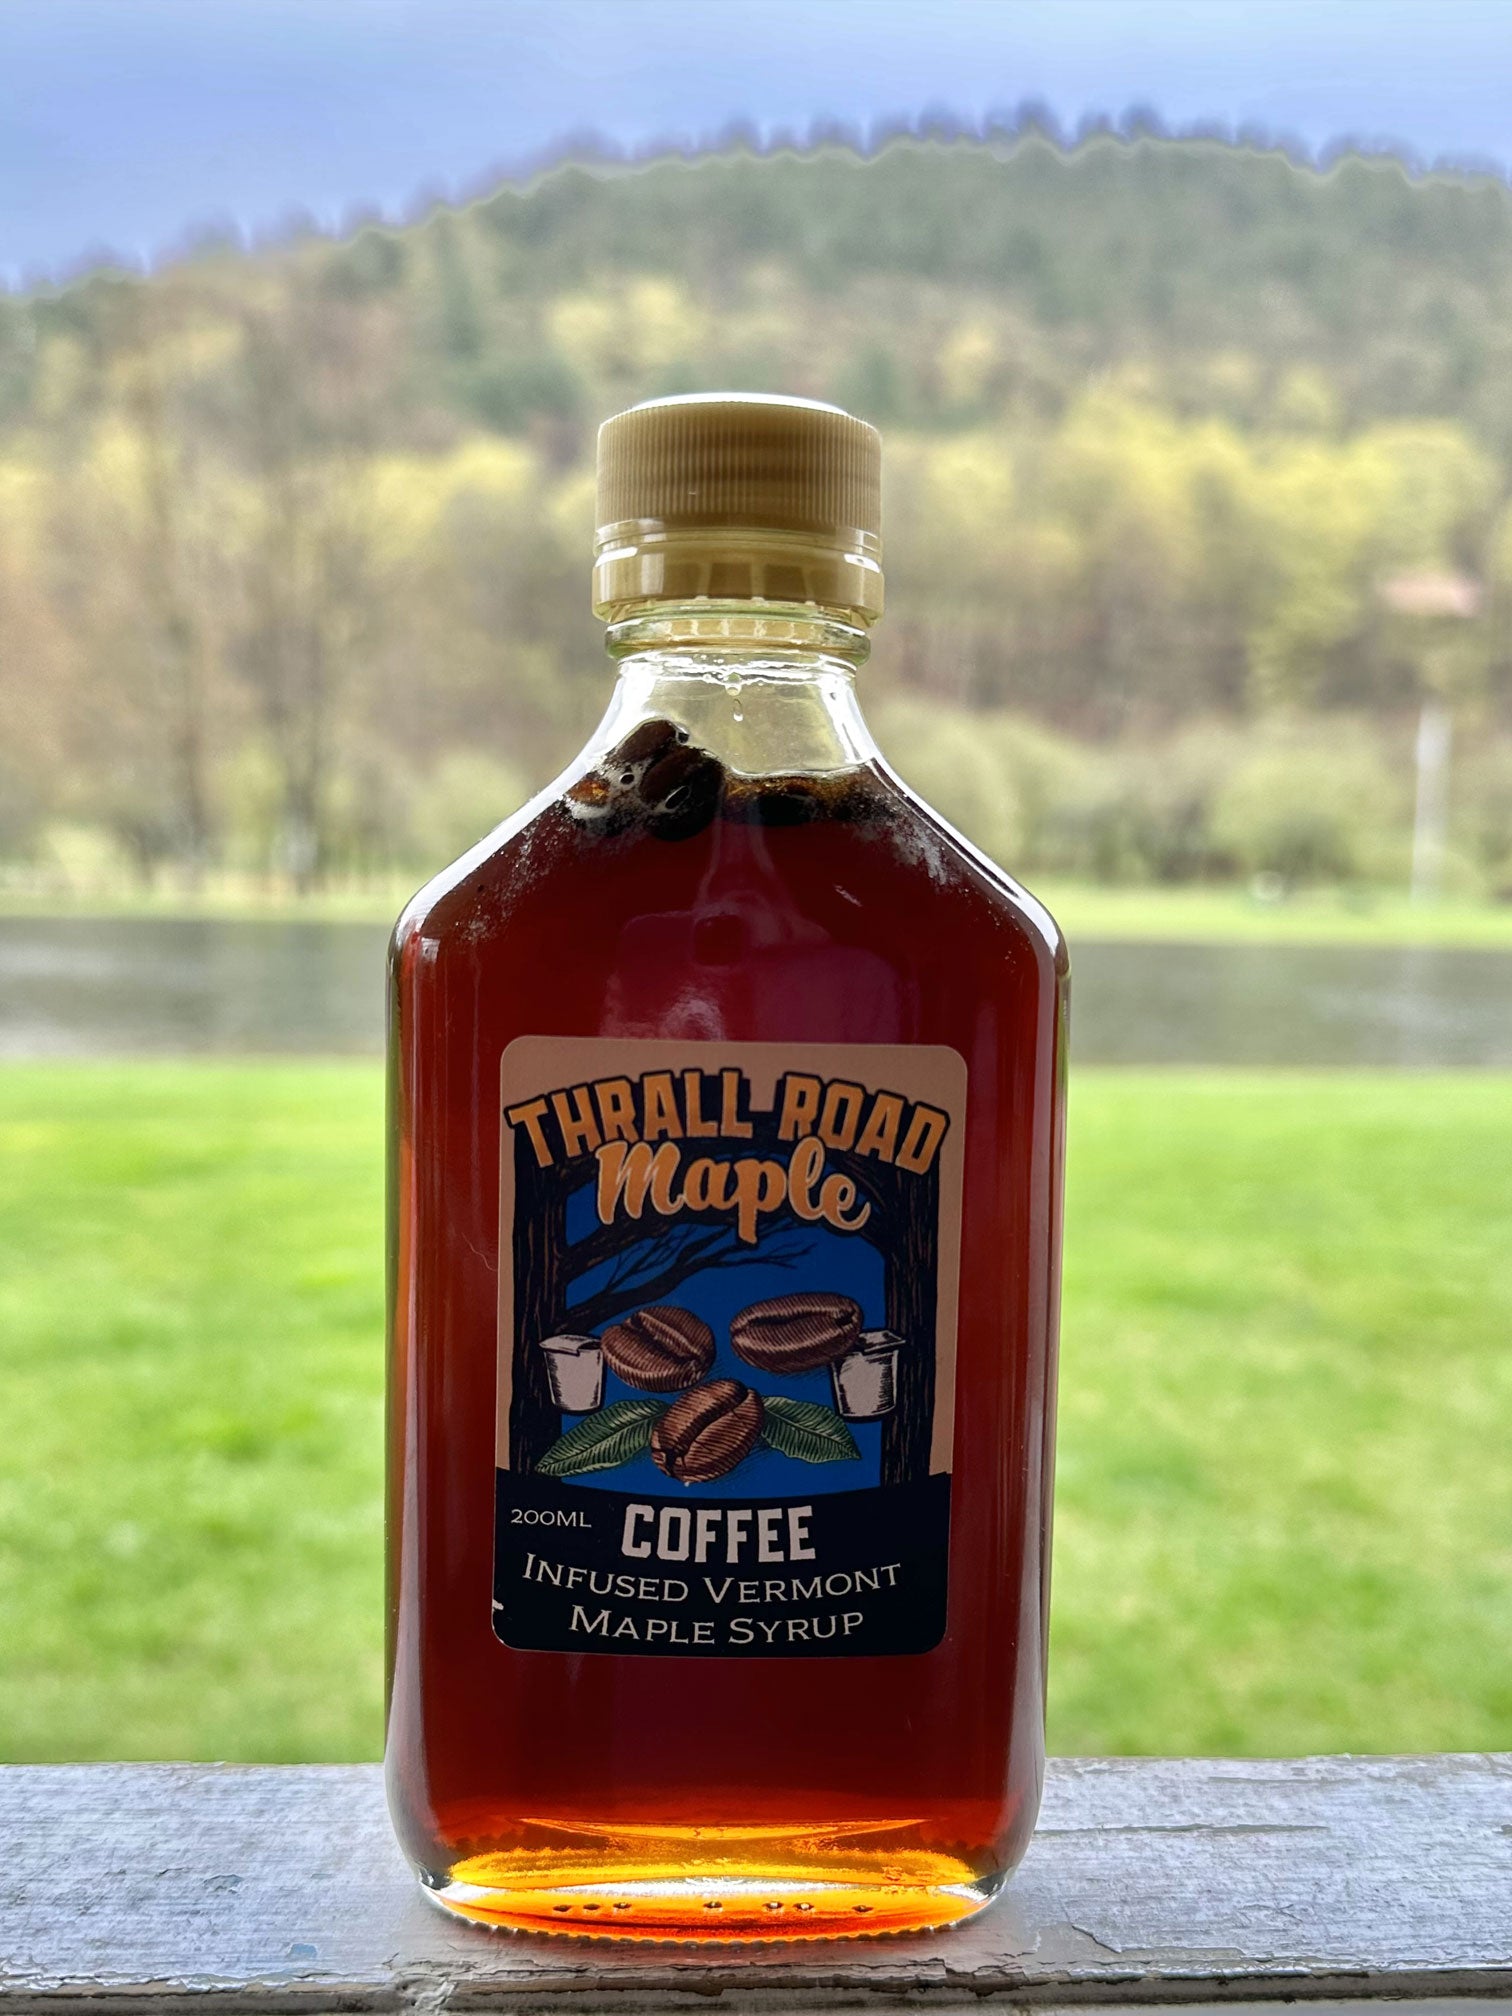 Thrall Road Maple - Coffee Infused Maple Syrup